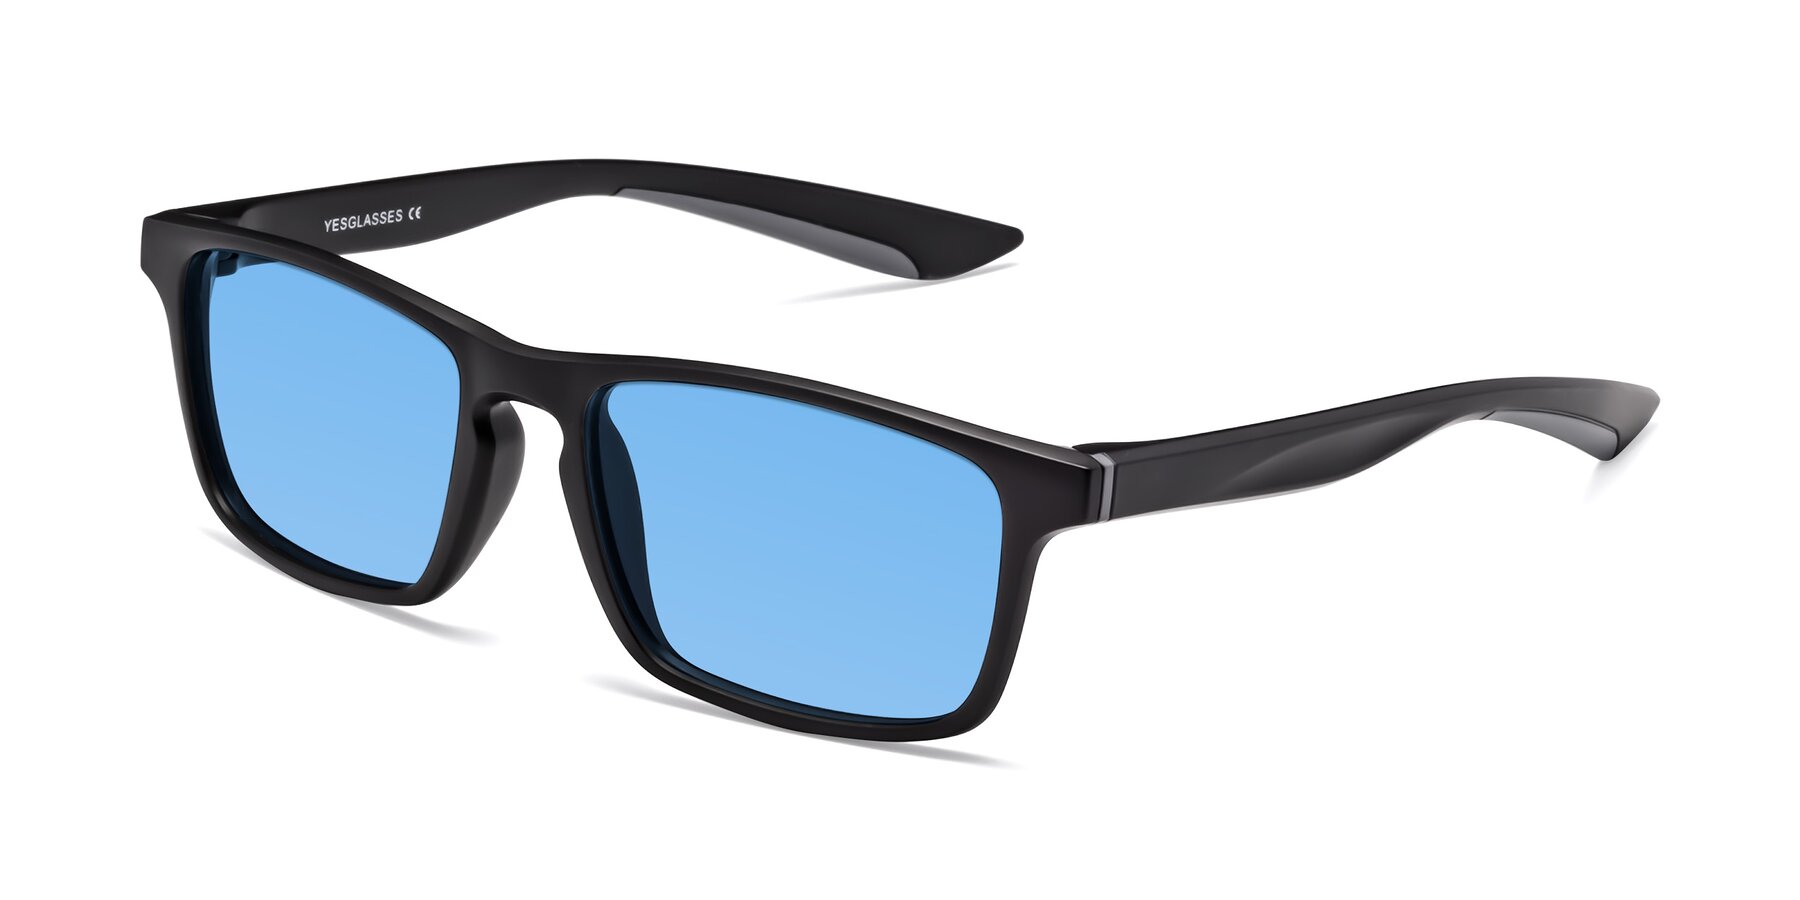 Angle of Passion in Matte Black-Gray with Medium Blue Tinted Lenses